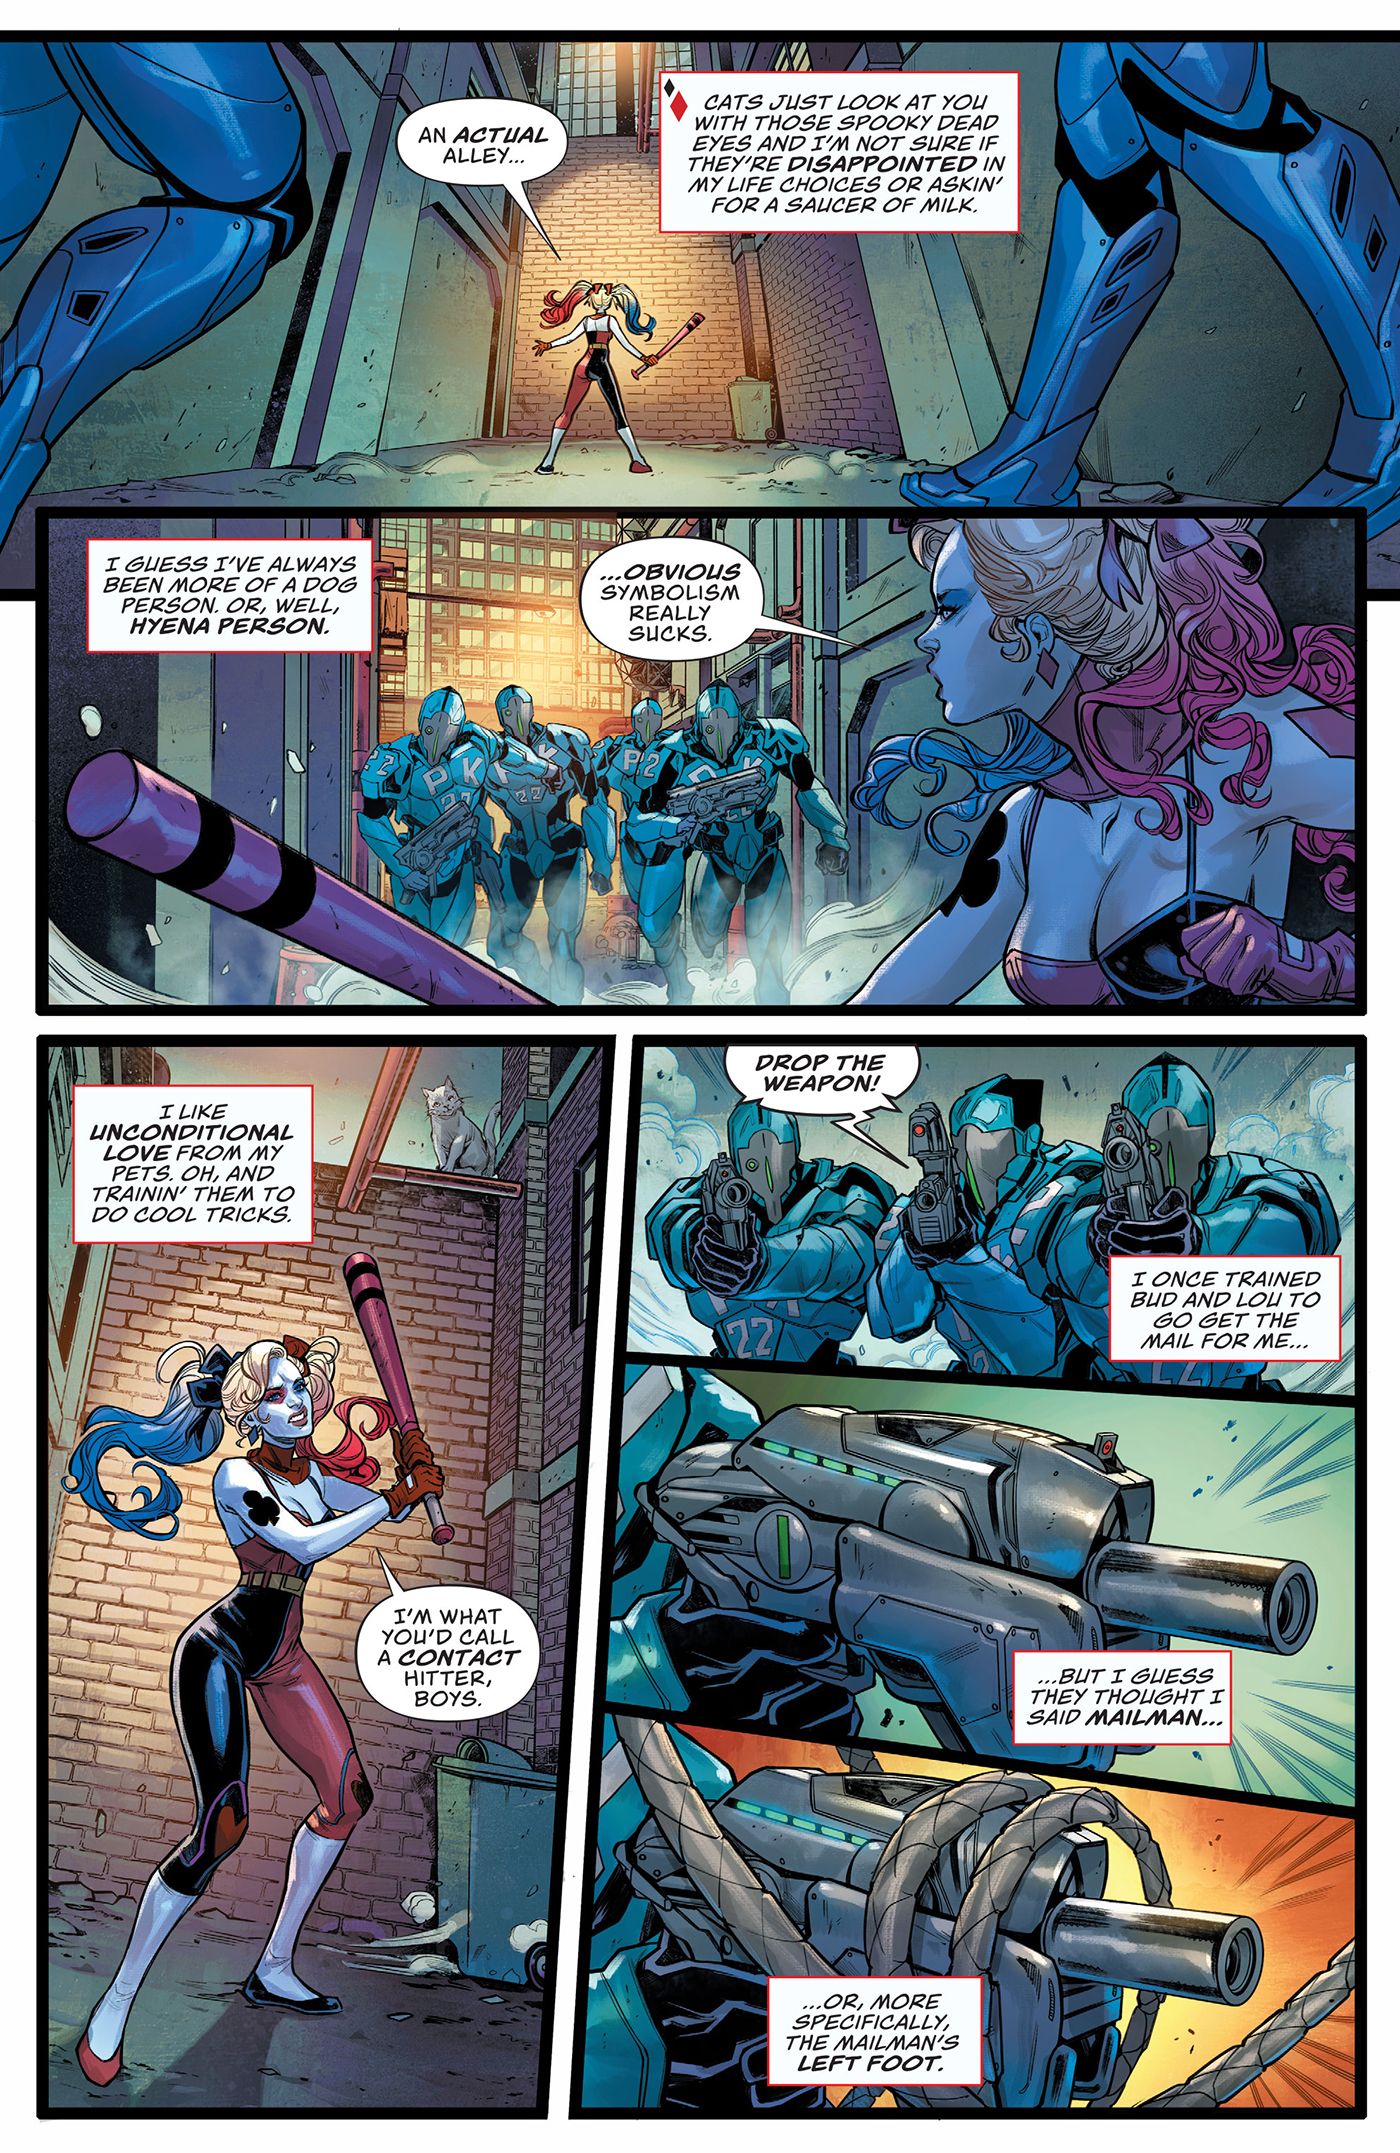 Harley Quinn takes a stand against the peacekeepers.